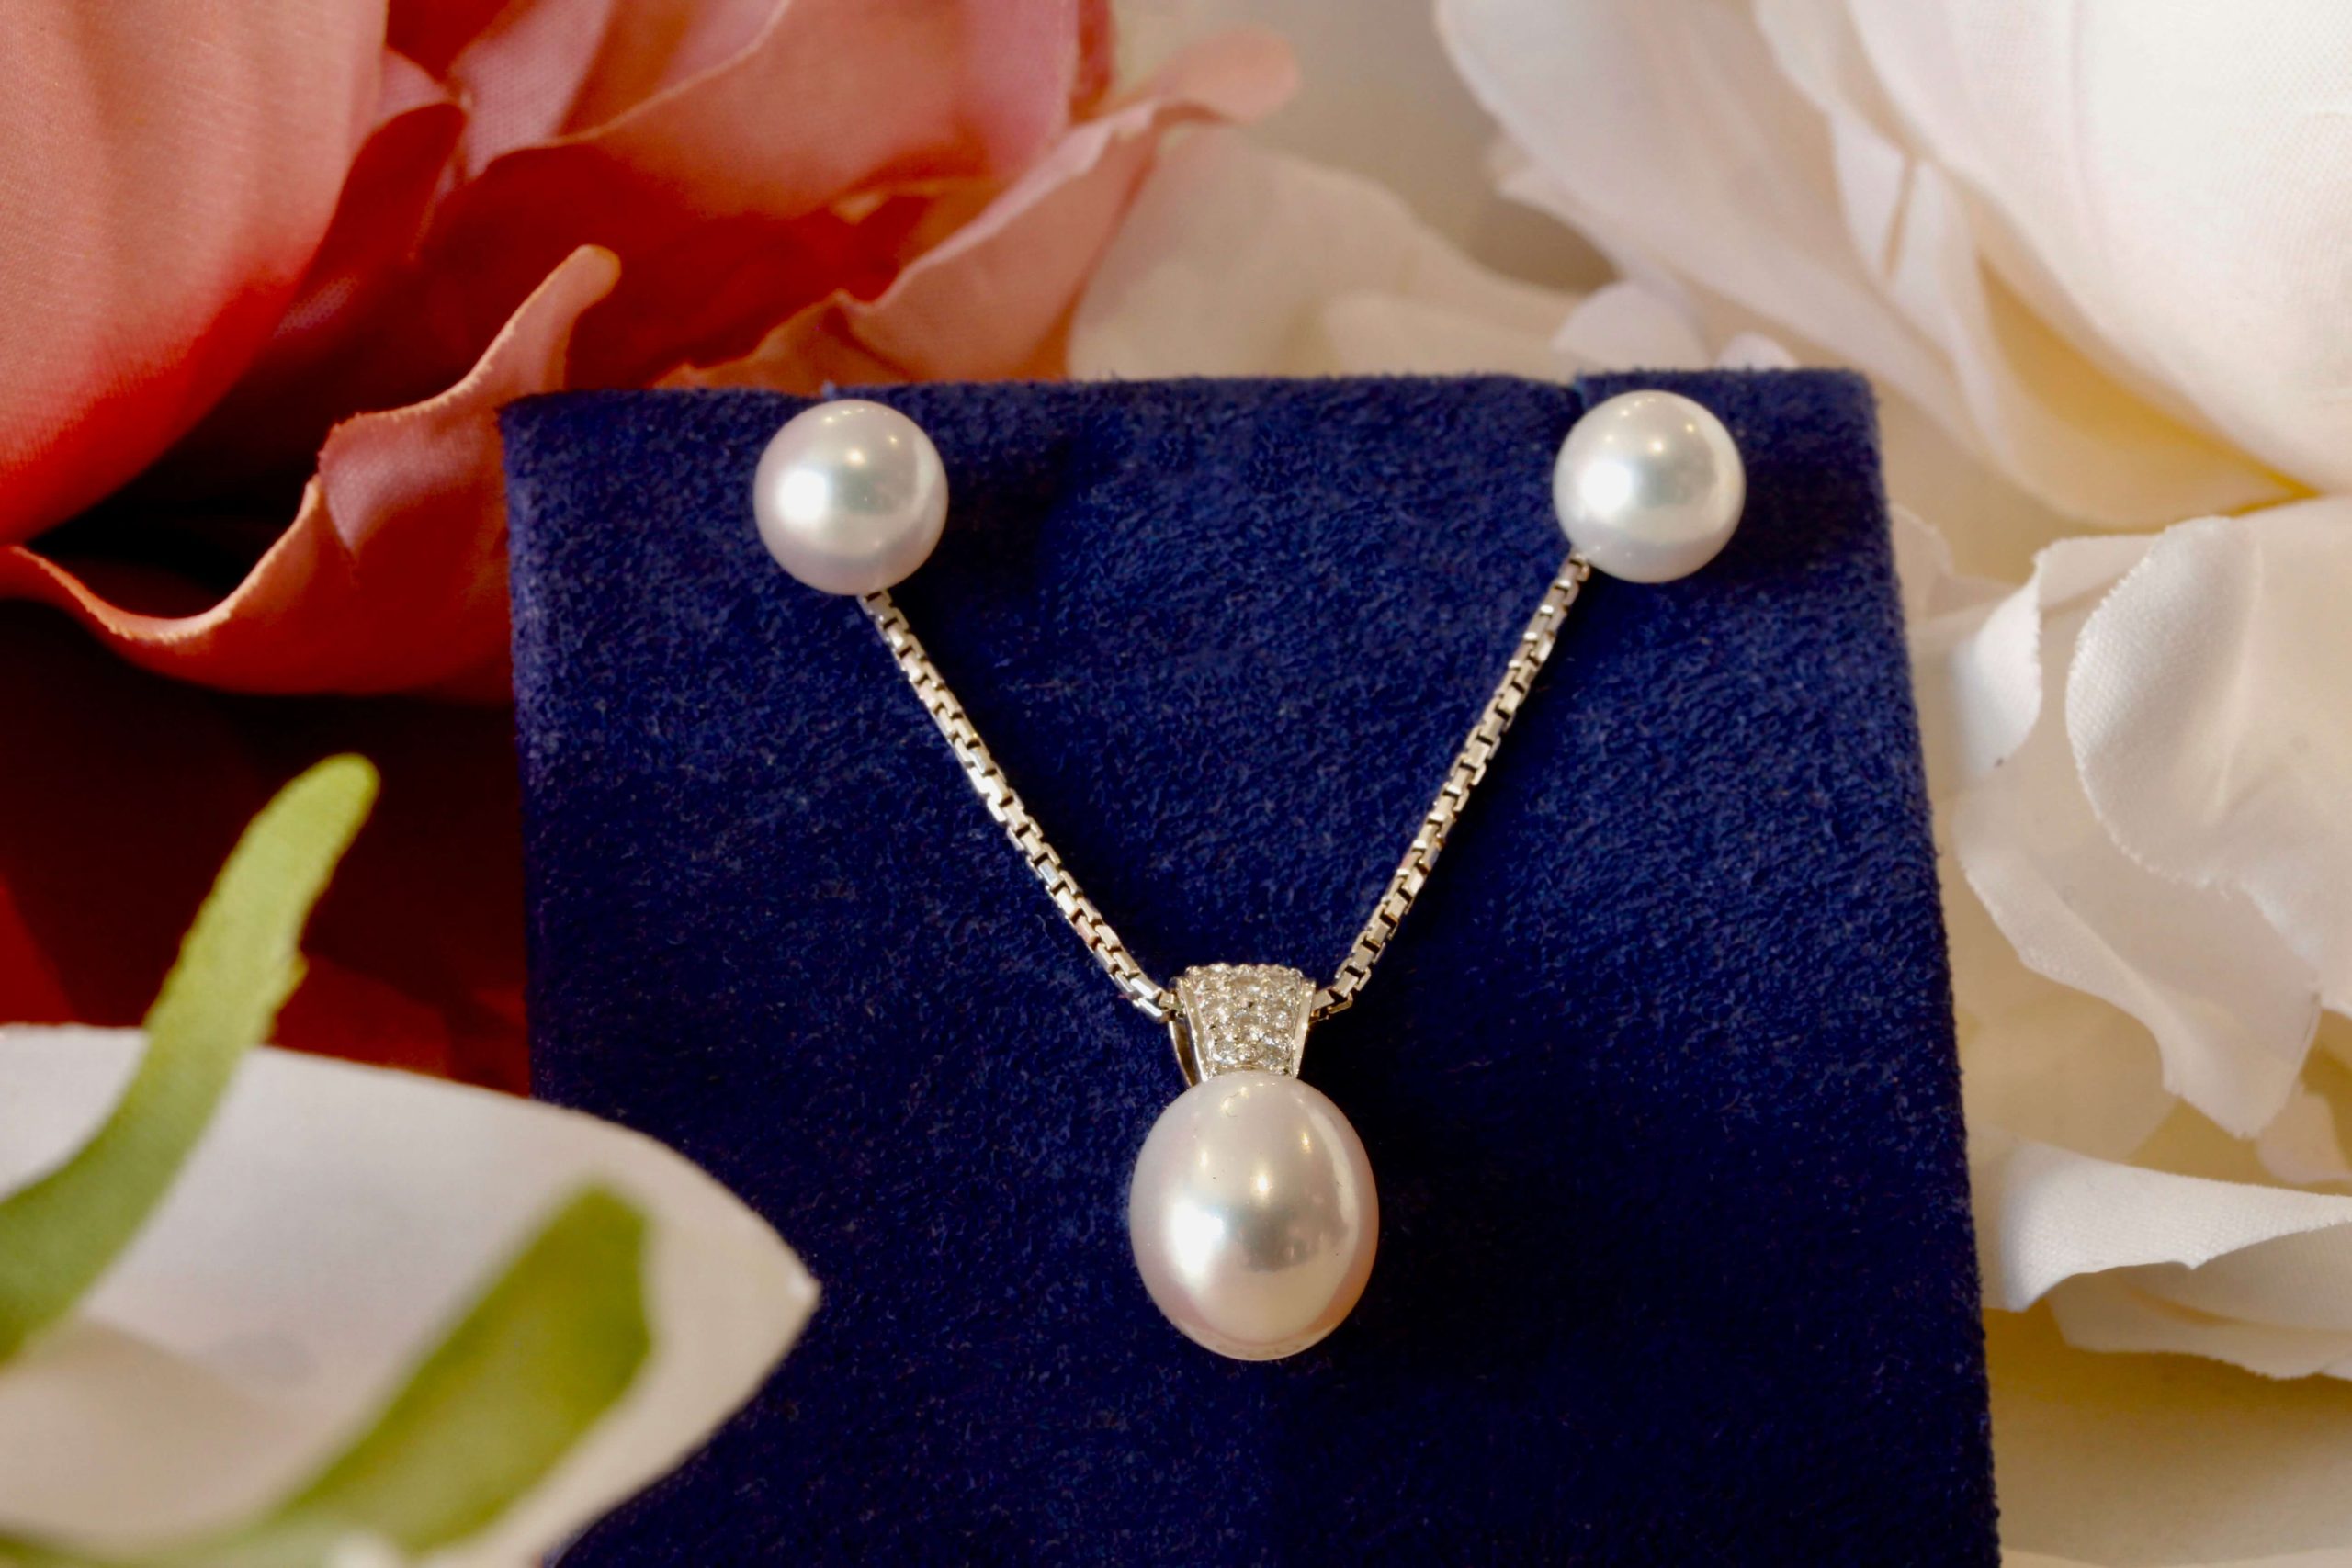 pearl and diamond necklace and earrings set showing summer jewellery trends